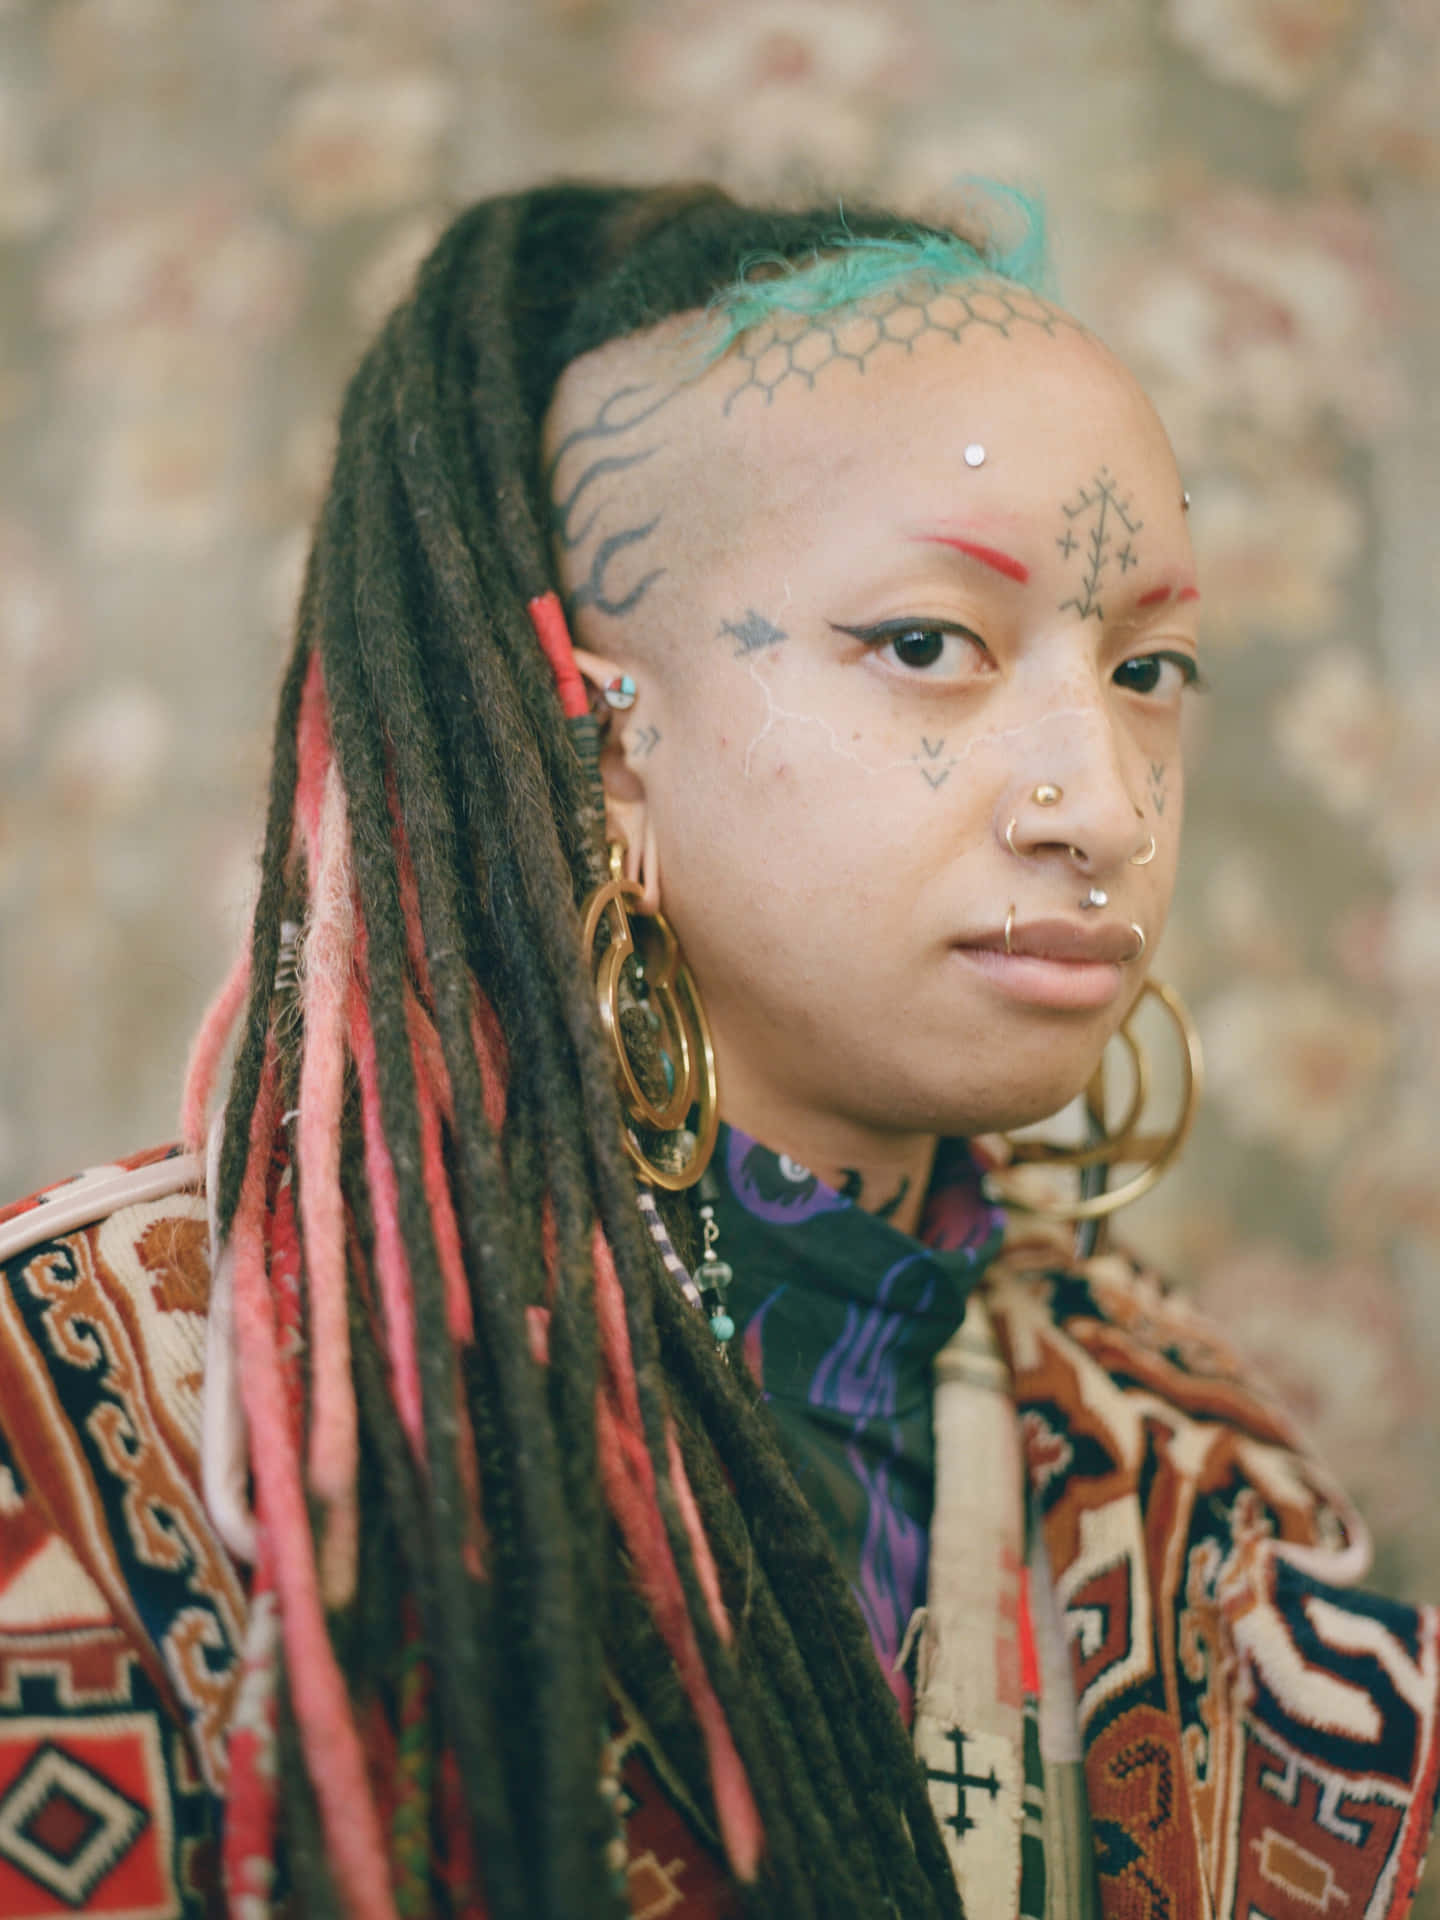 A Woman With Dreadlocks And Piercings